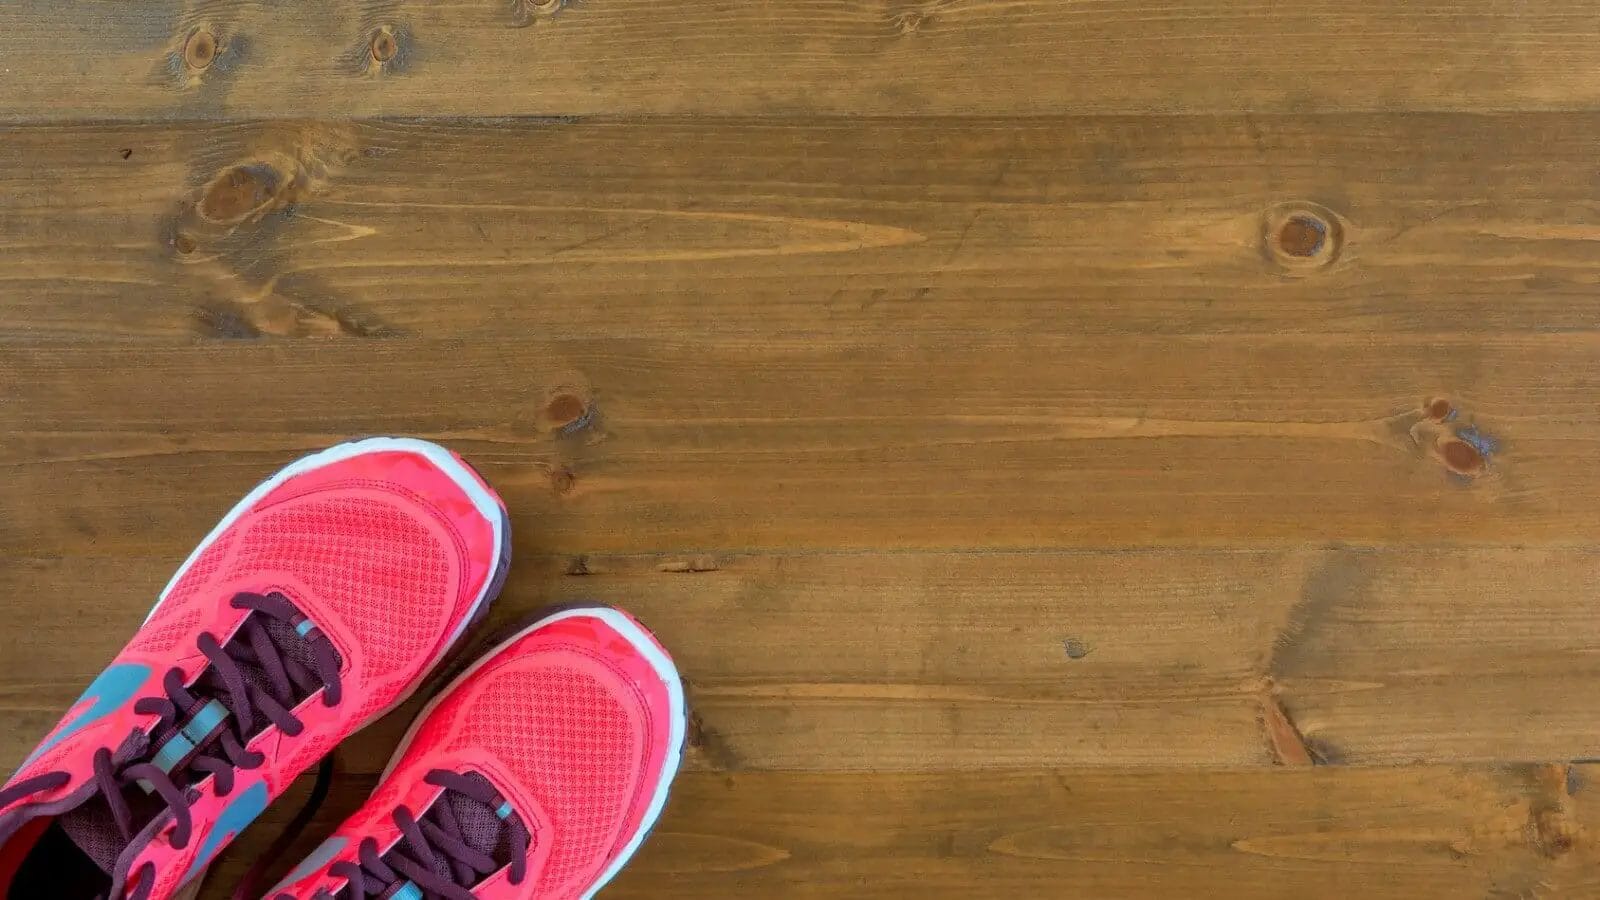 Pink running shoes for plantar fasciitis on wooden floor.